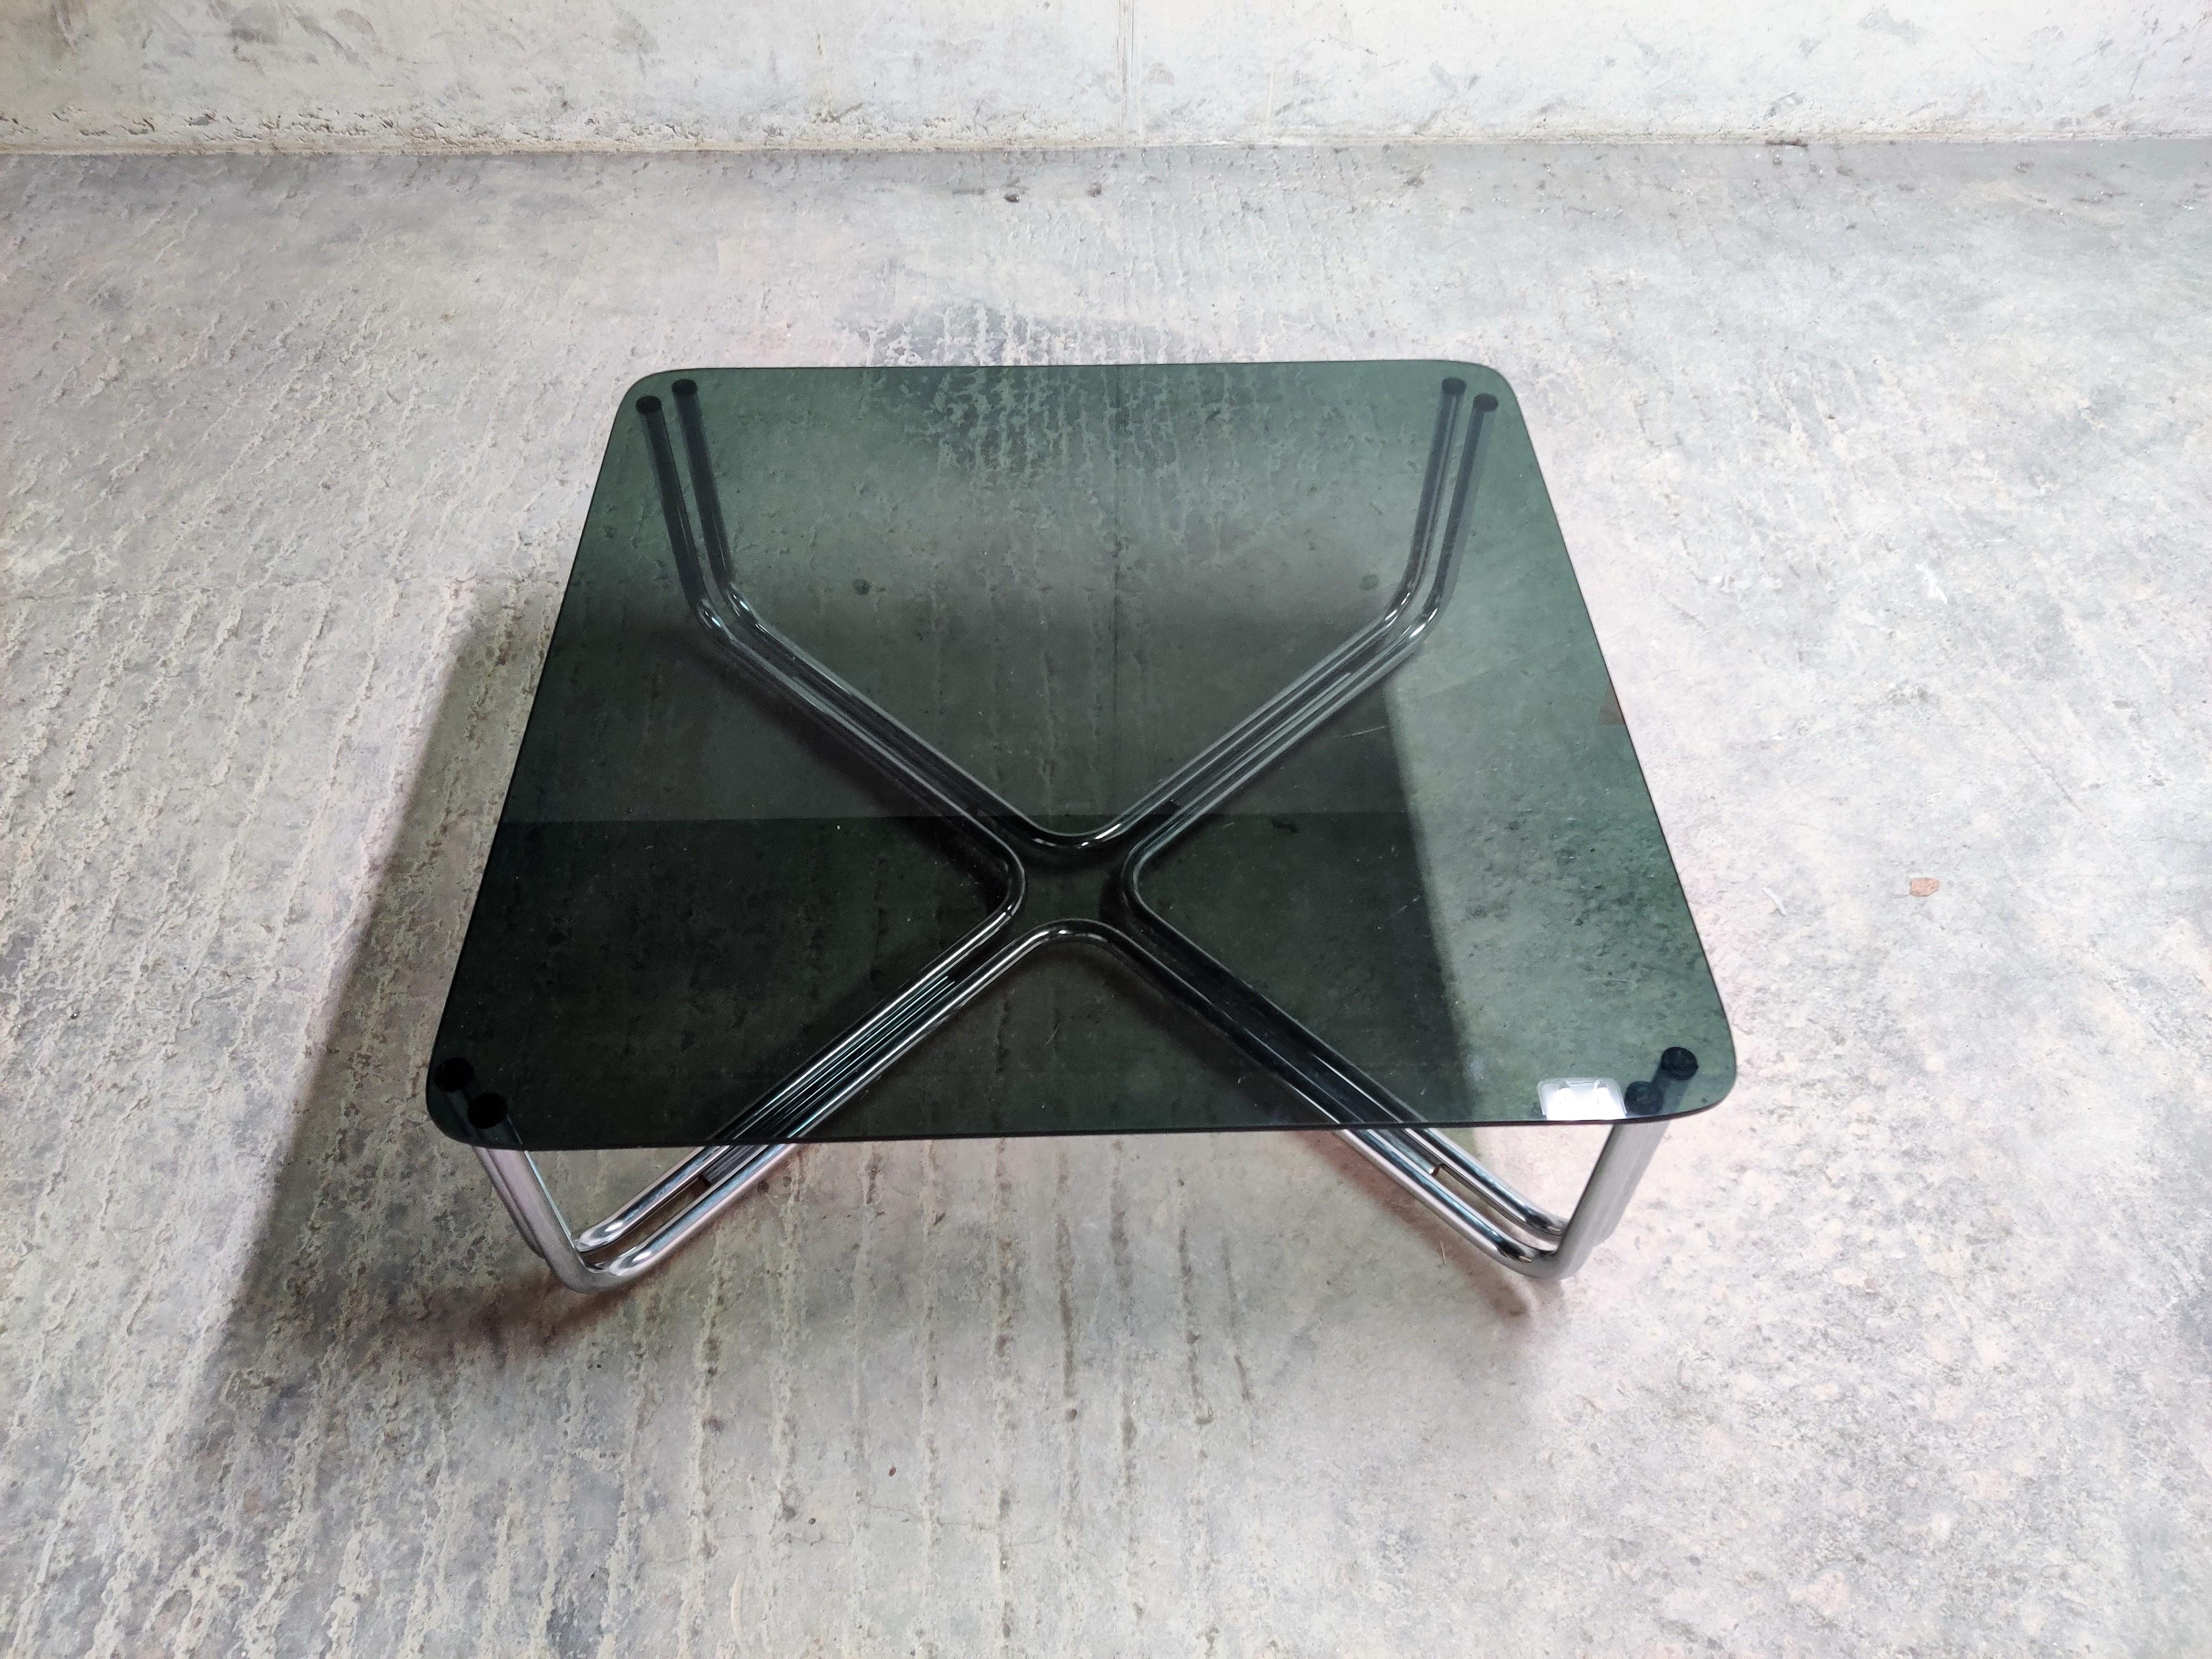 Mid-Century Modern Model 784 Coffee Table by Gianfranco Frattini for Cassina, 1960s